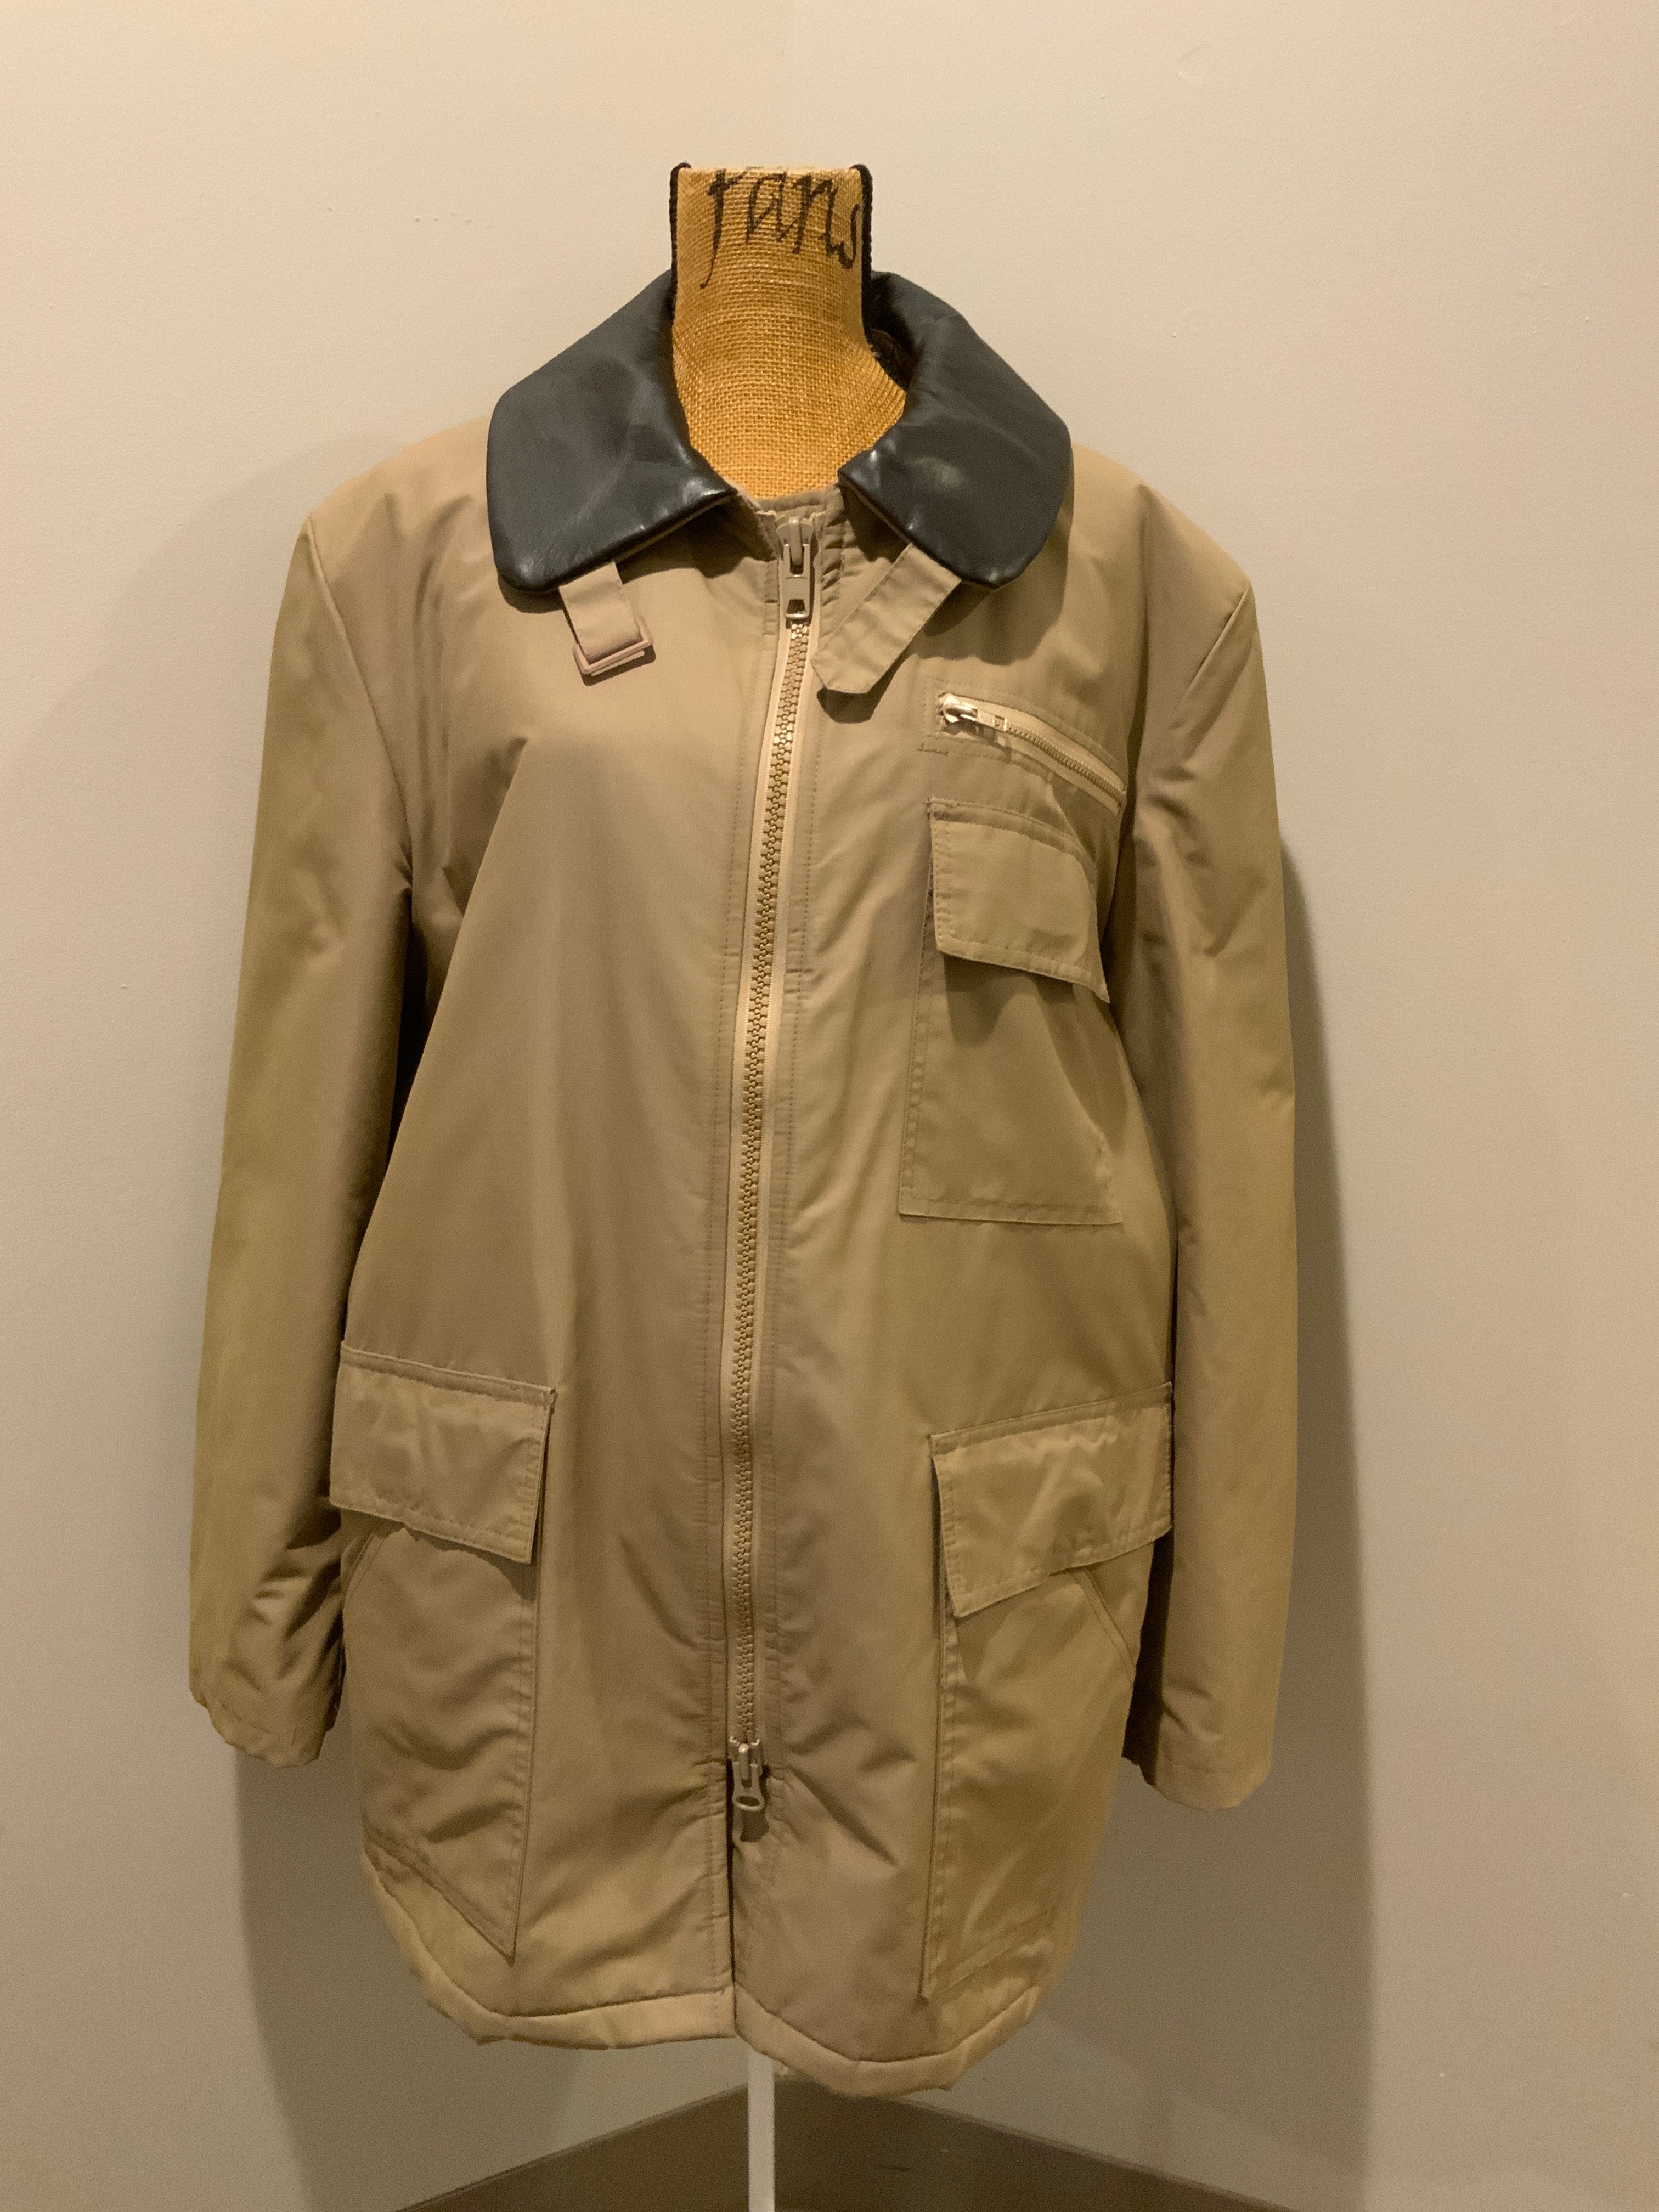 Vintage Special Reserve Beige Hunting Jacket, Made in Canada